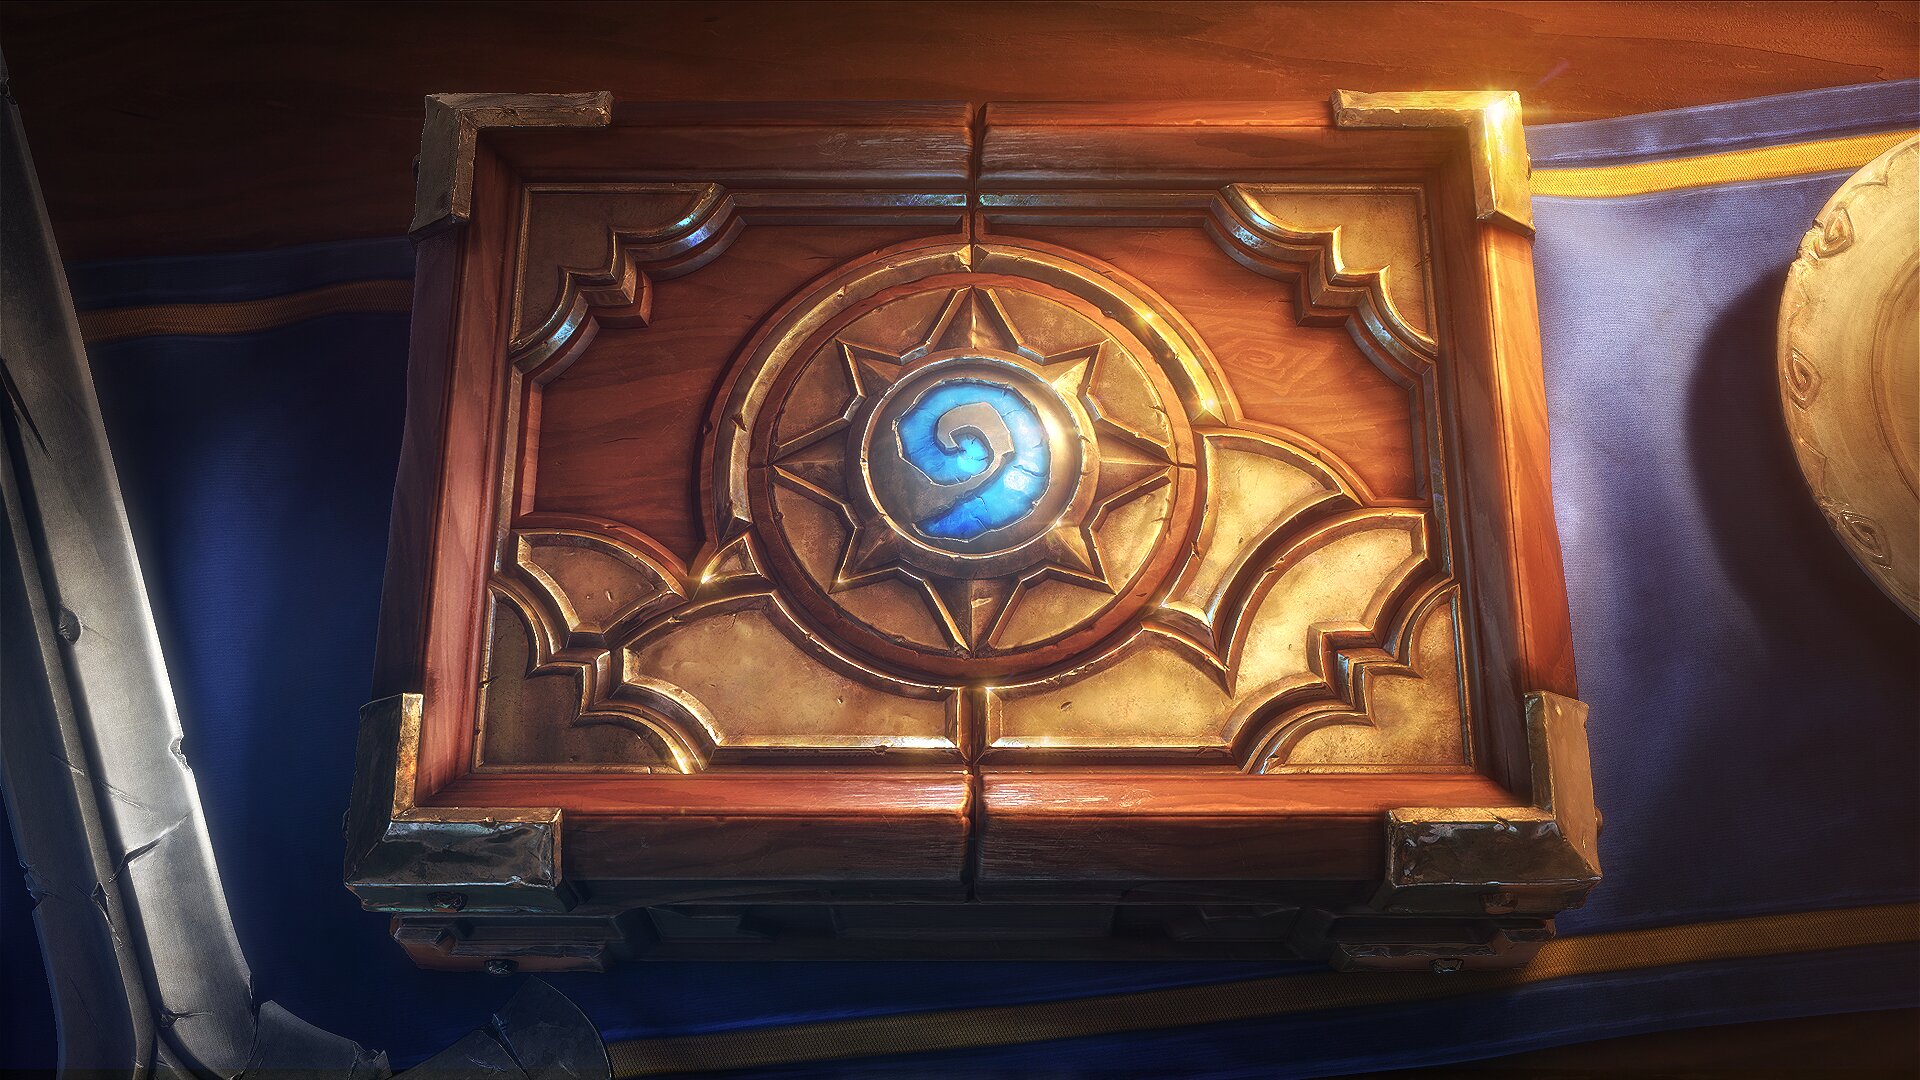 Hearthstone esports are undergoing some significant changes as Blizzard prepares for 2019 - including the removal of Hearthstone Championship Points.